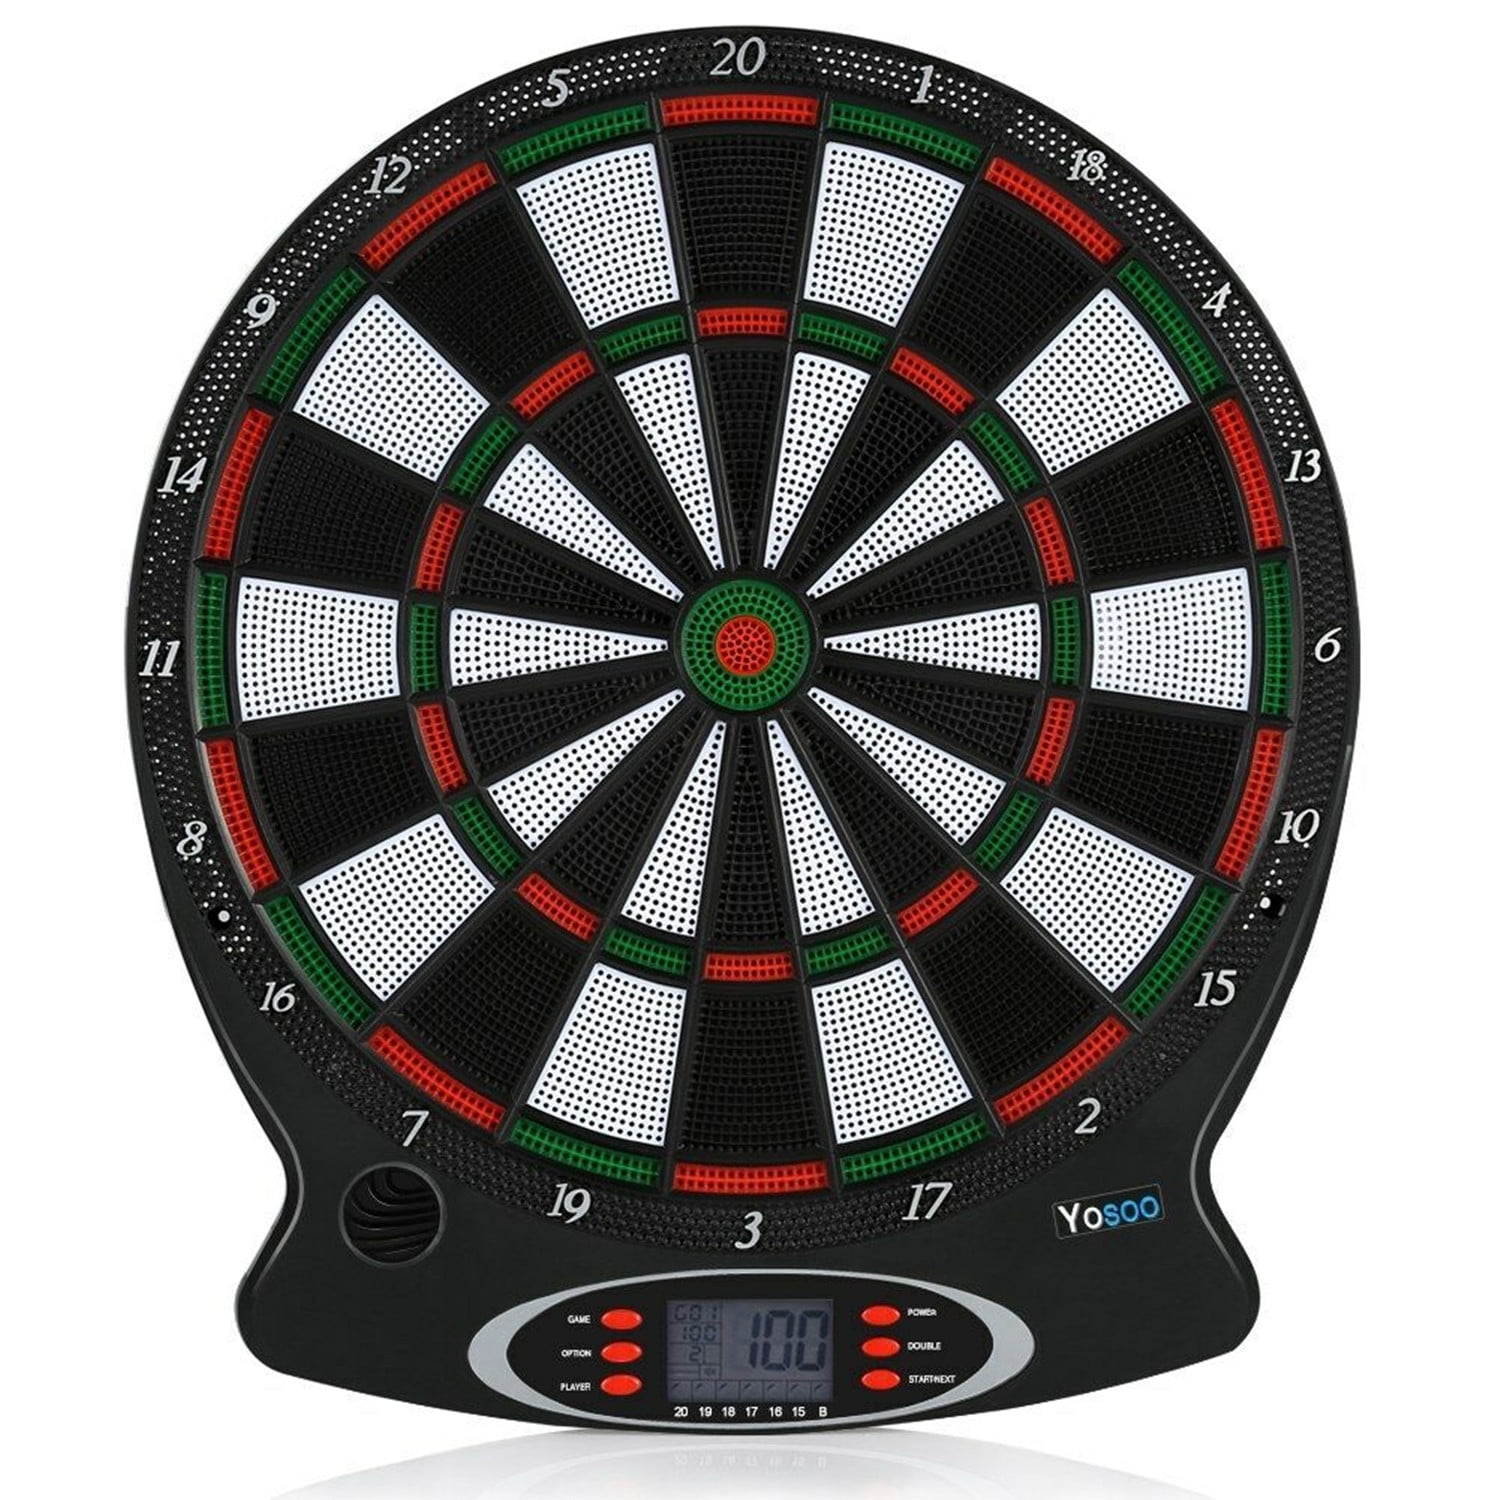 New Plohee Electronic Dart Board Set Target Game Room LED Display with 6 Darts 